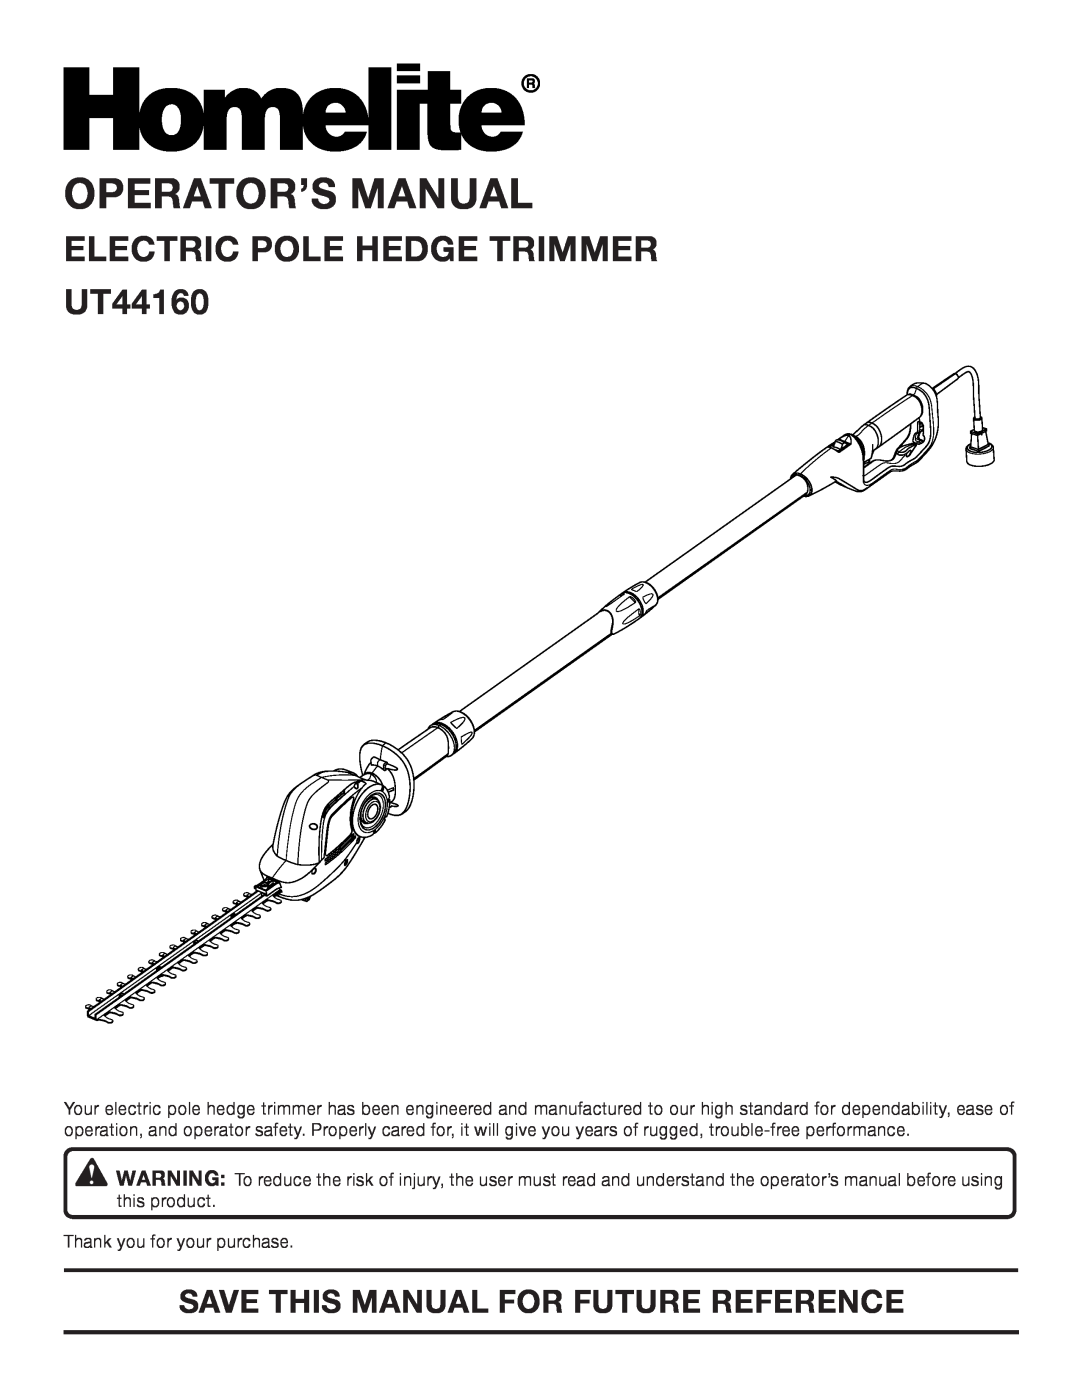 Homelite manual Operator’S Manual, electric pole hedge trimmer UT44160, Save This Manual For Future Reference 